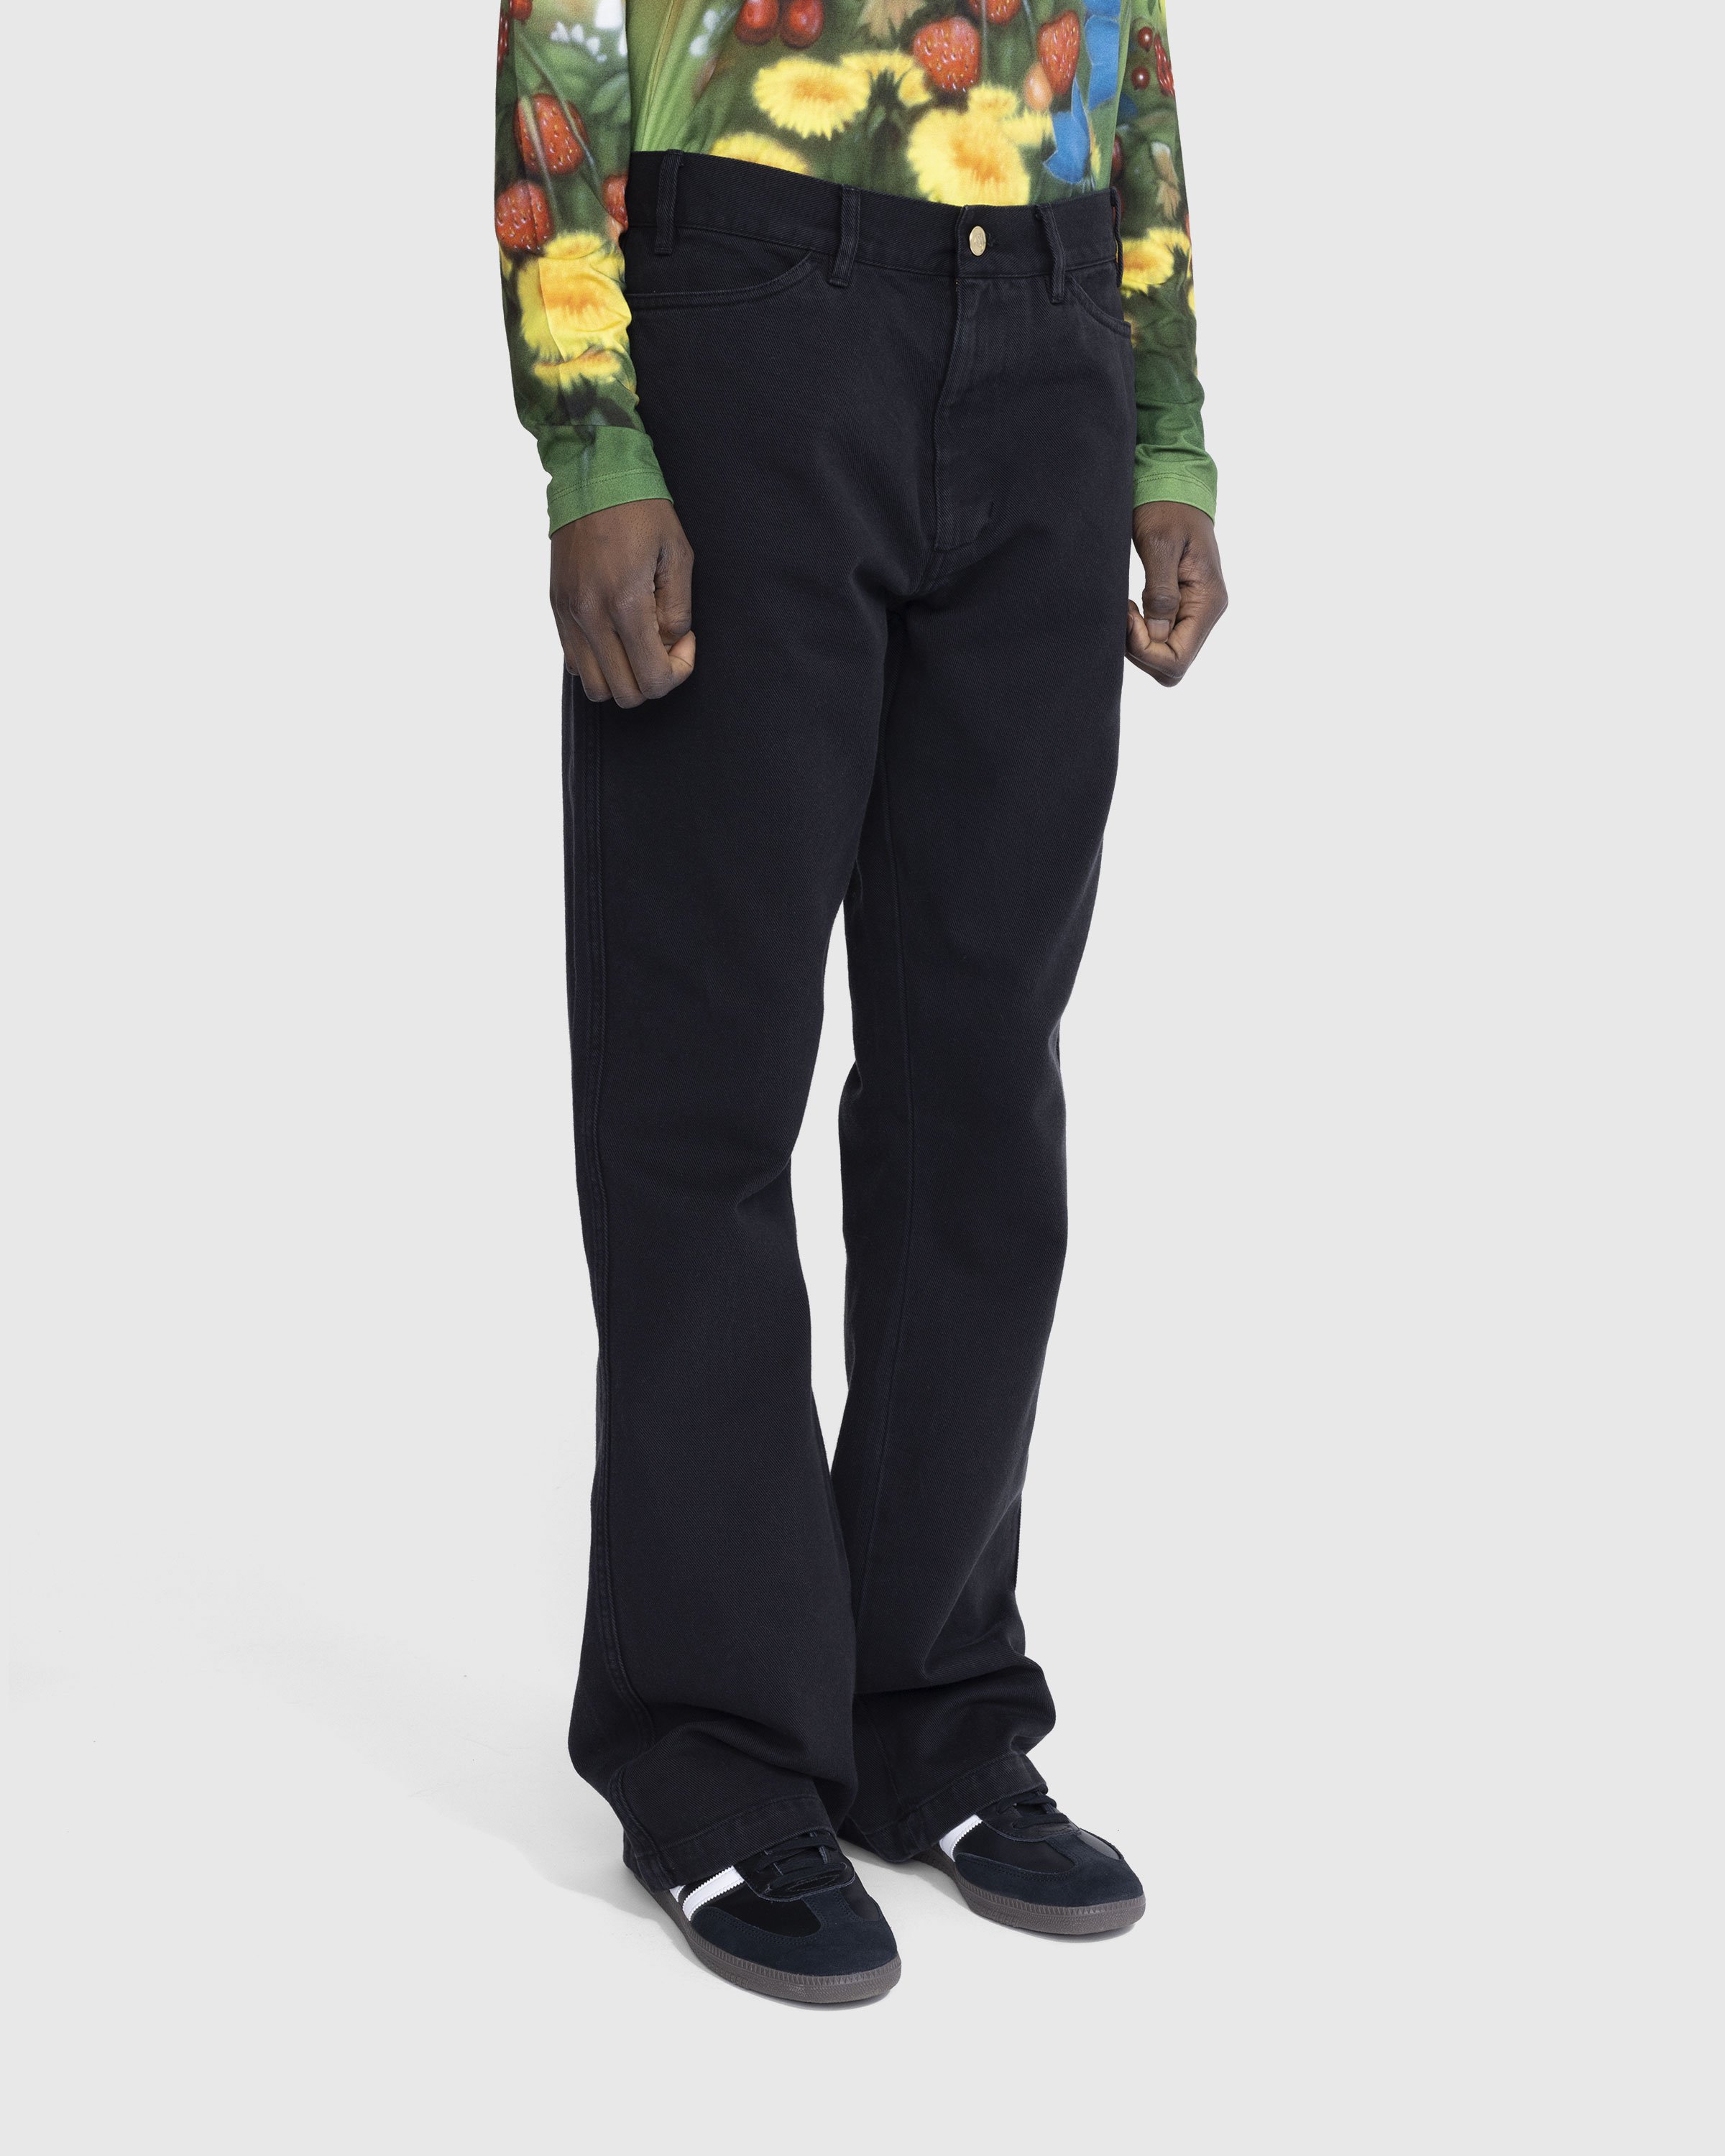 Stockholm Surfboard Club - Flared Cotton Twill Trousers Black - Clothing - Black - Image 4